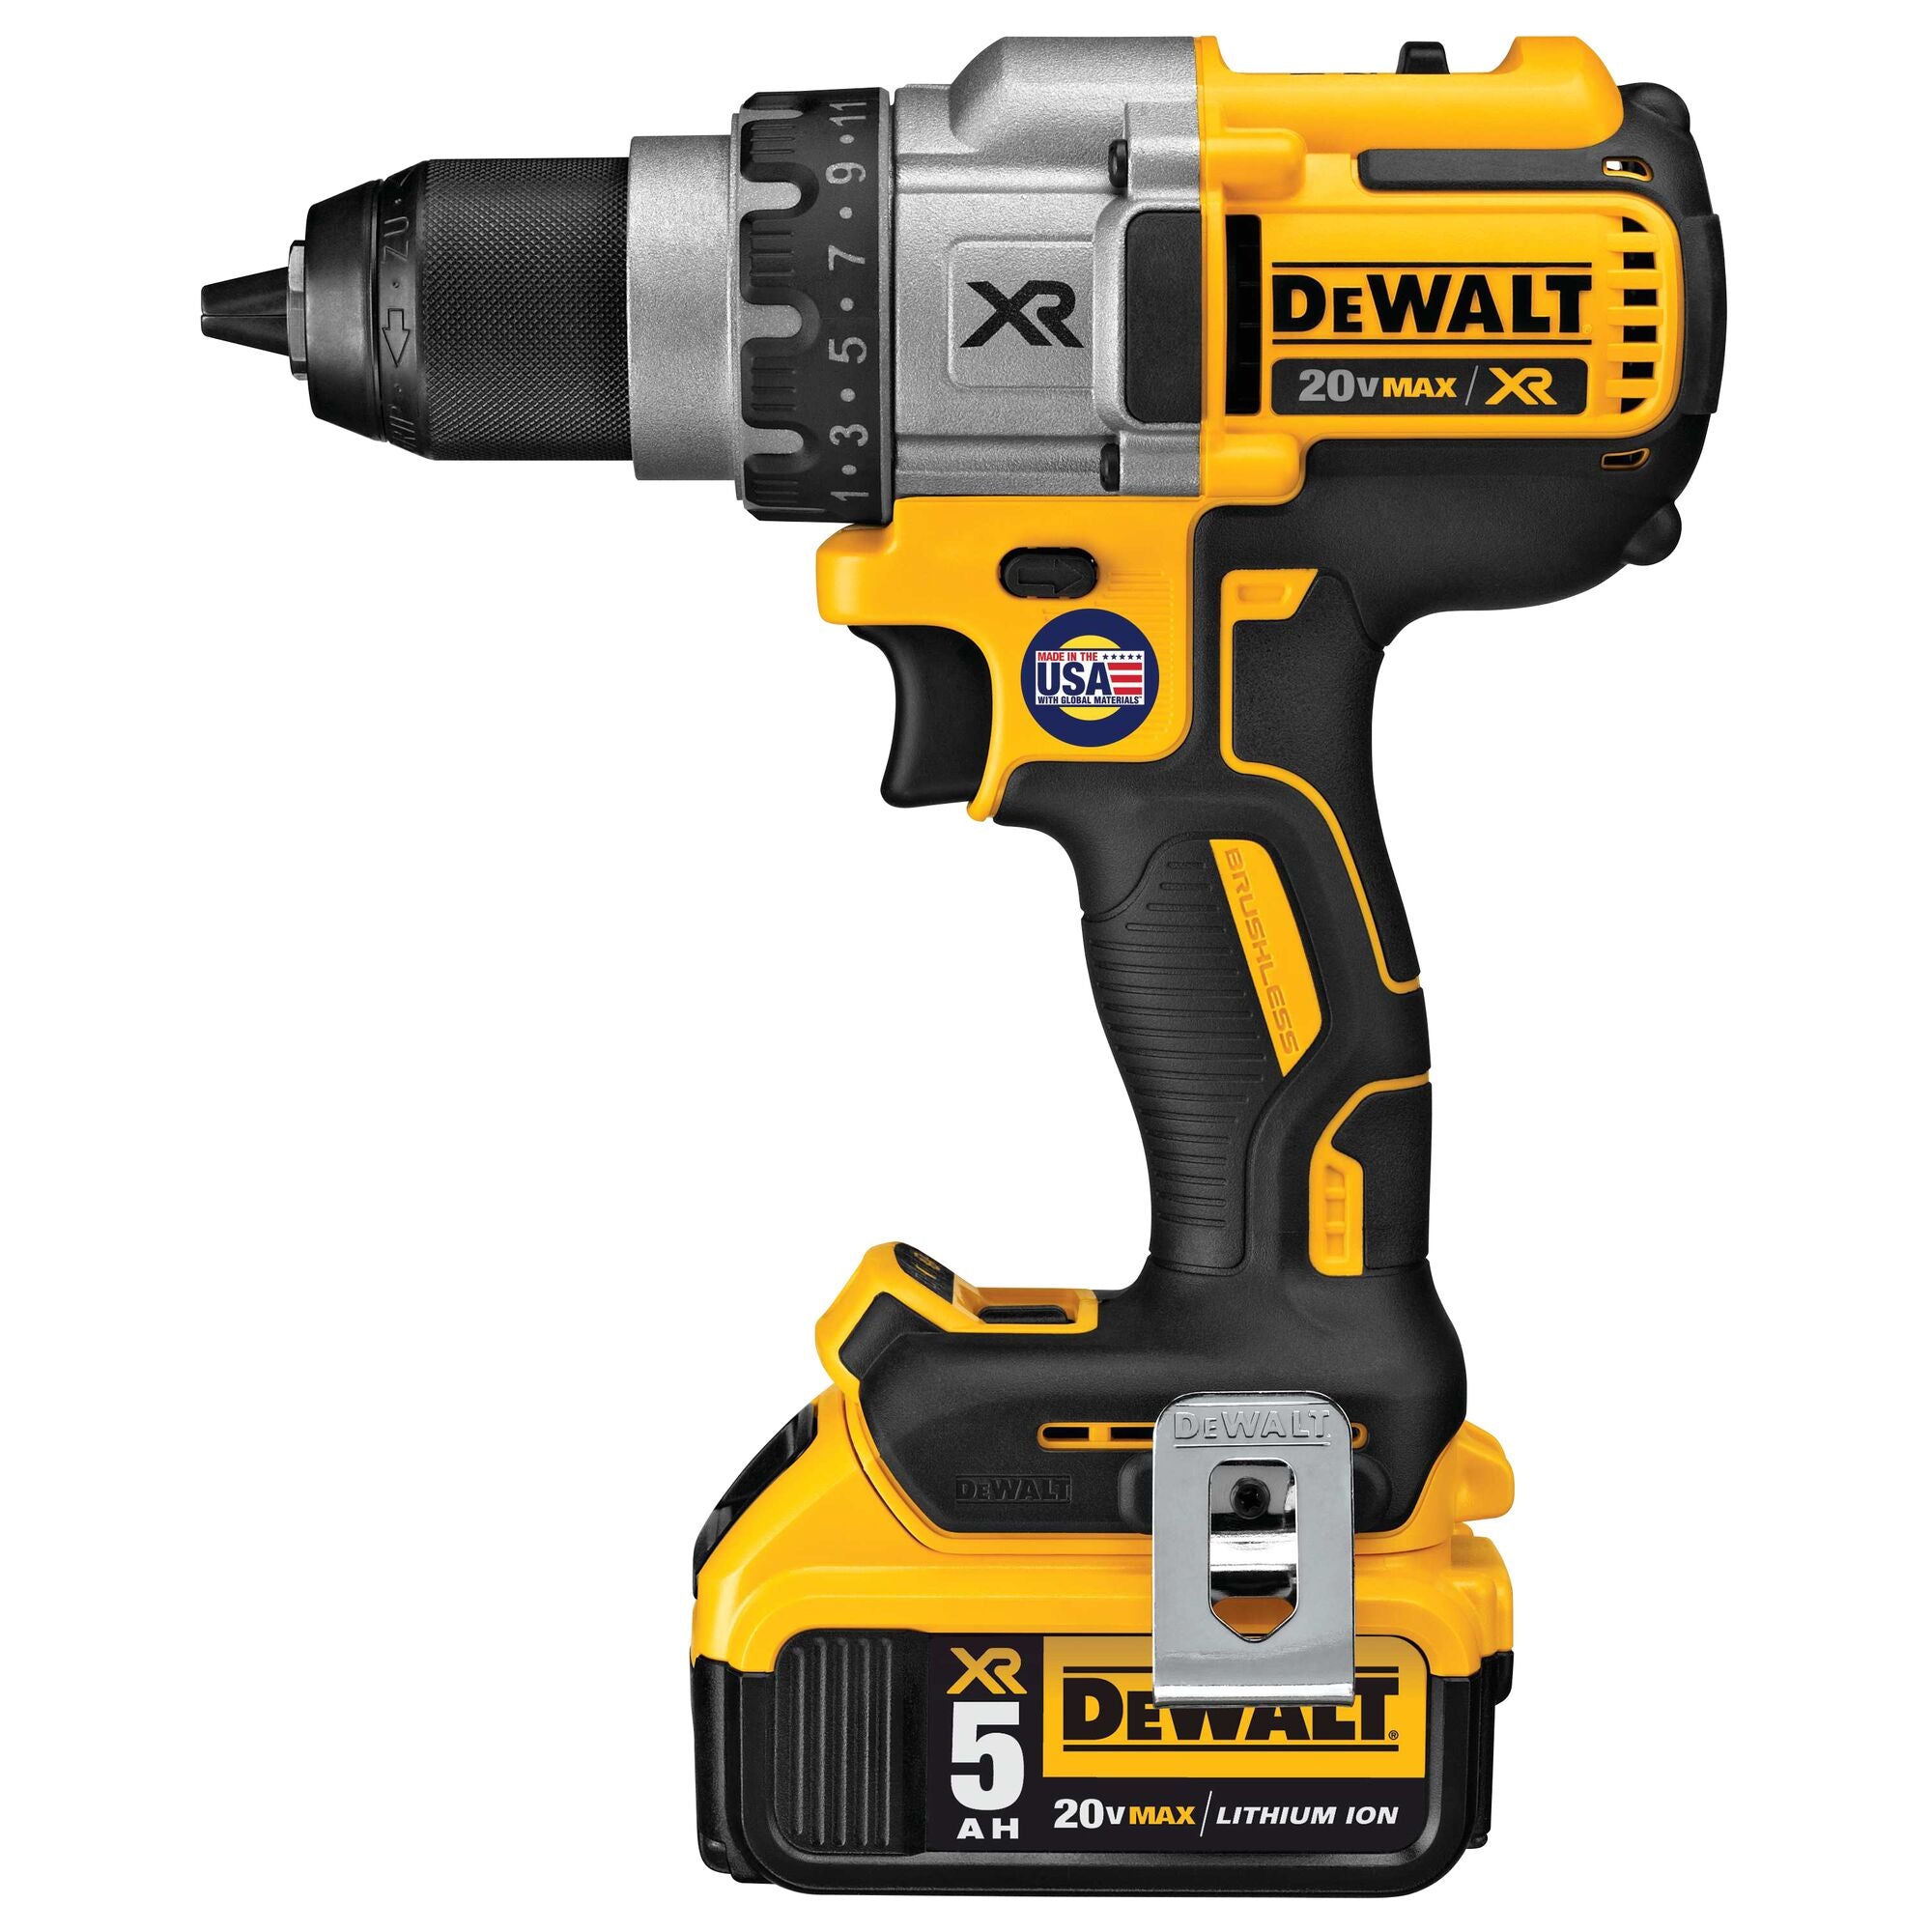 DeWALT DCD991P2 Max XR Drill 3 Speed Lithion Ion Drill/Driver Kit with 2 DCB205 and Charger